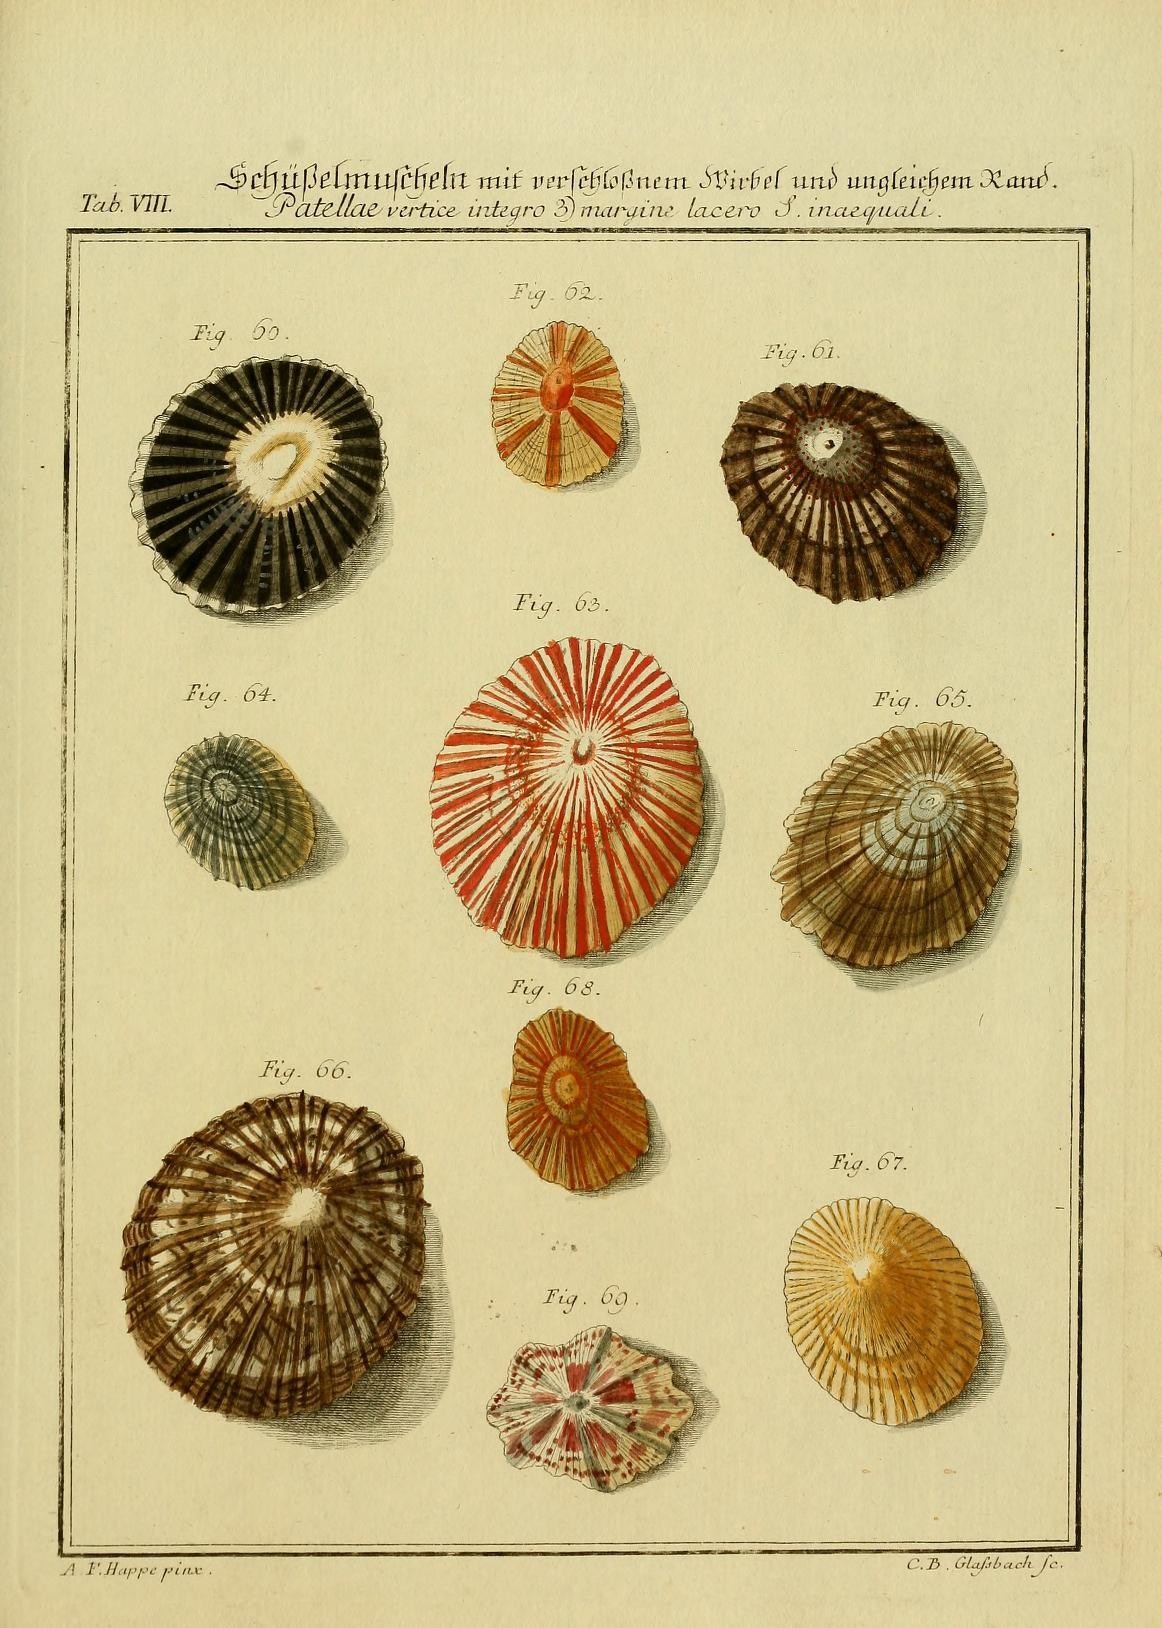 a group of shells and other marine animal species